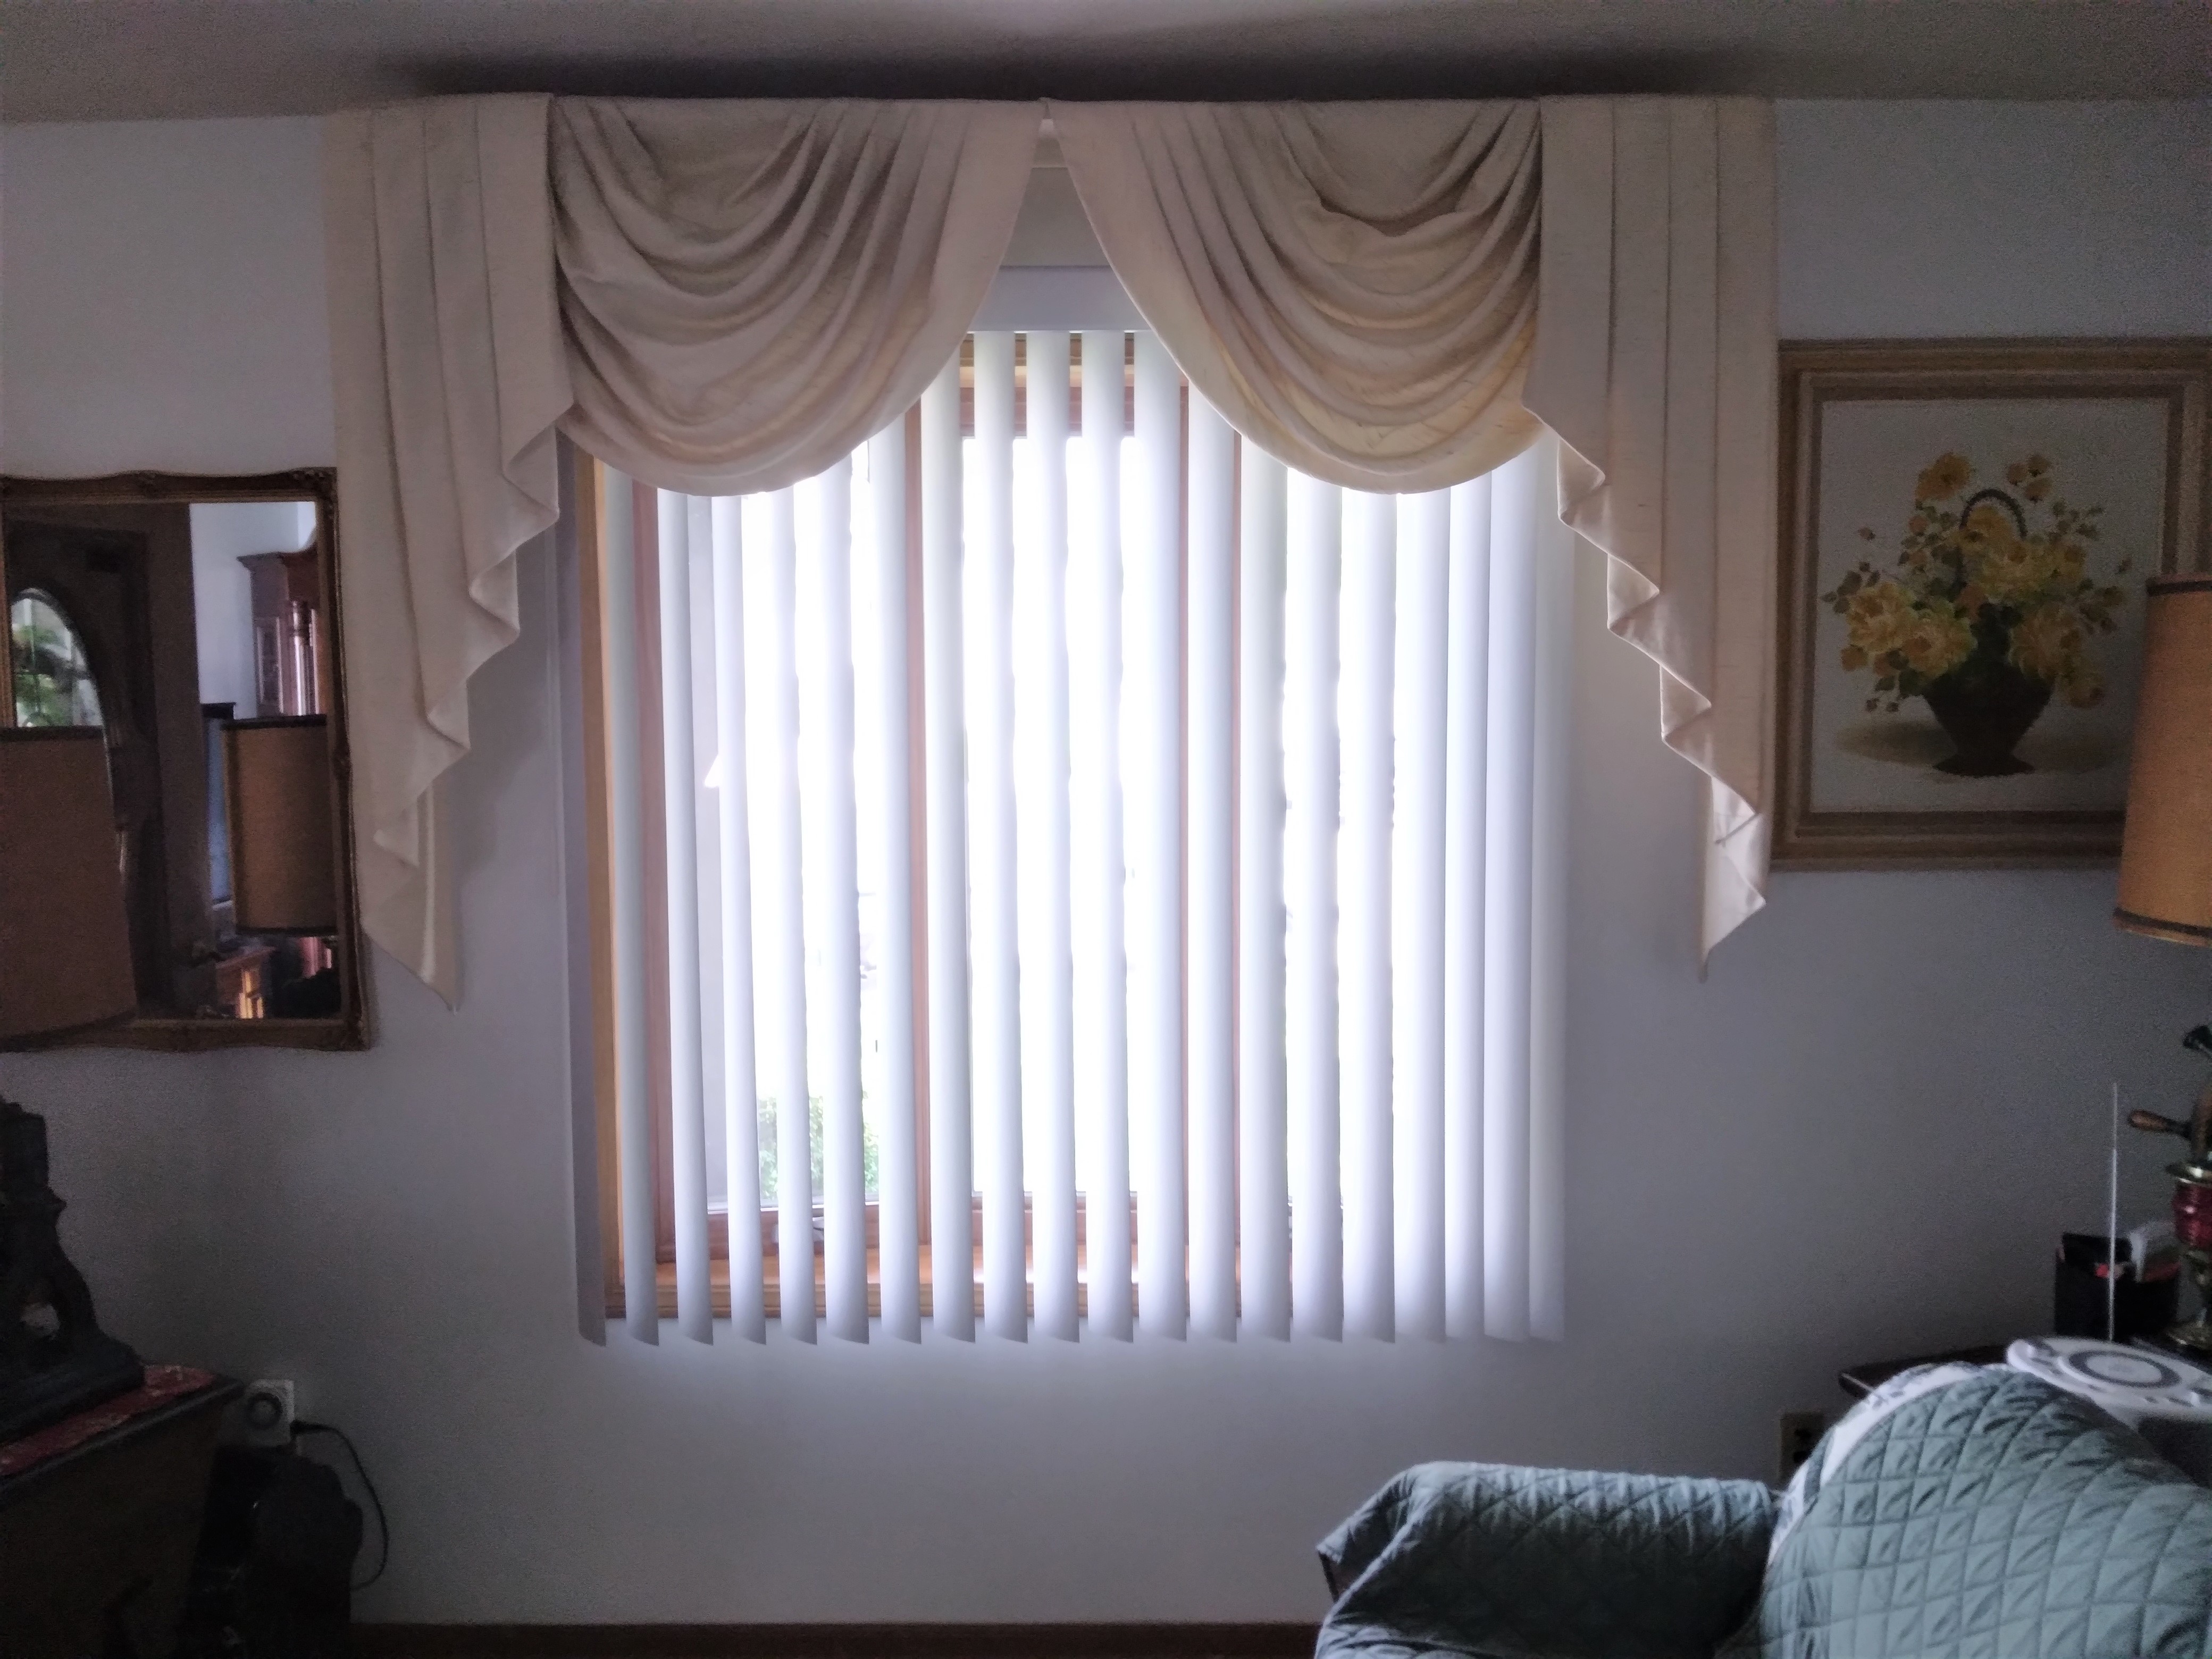 These vertical blinds in this Springfield Illinois living room provide a clean and fresh look.  BudgetBlinds  WindowCoverings  VerticalBlinds  Blinds  SpringfieldIllinois